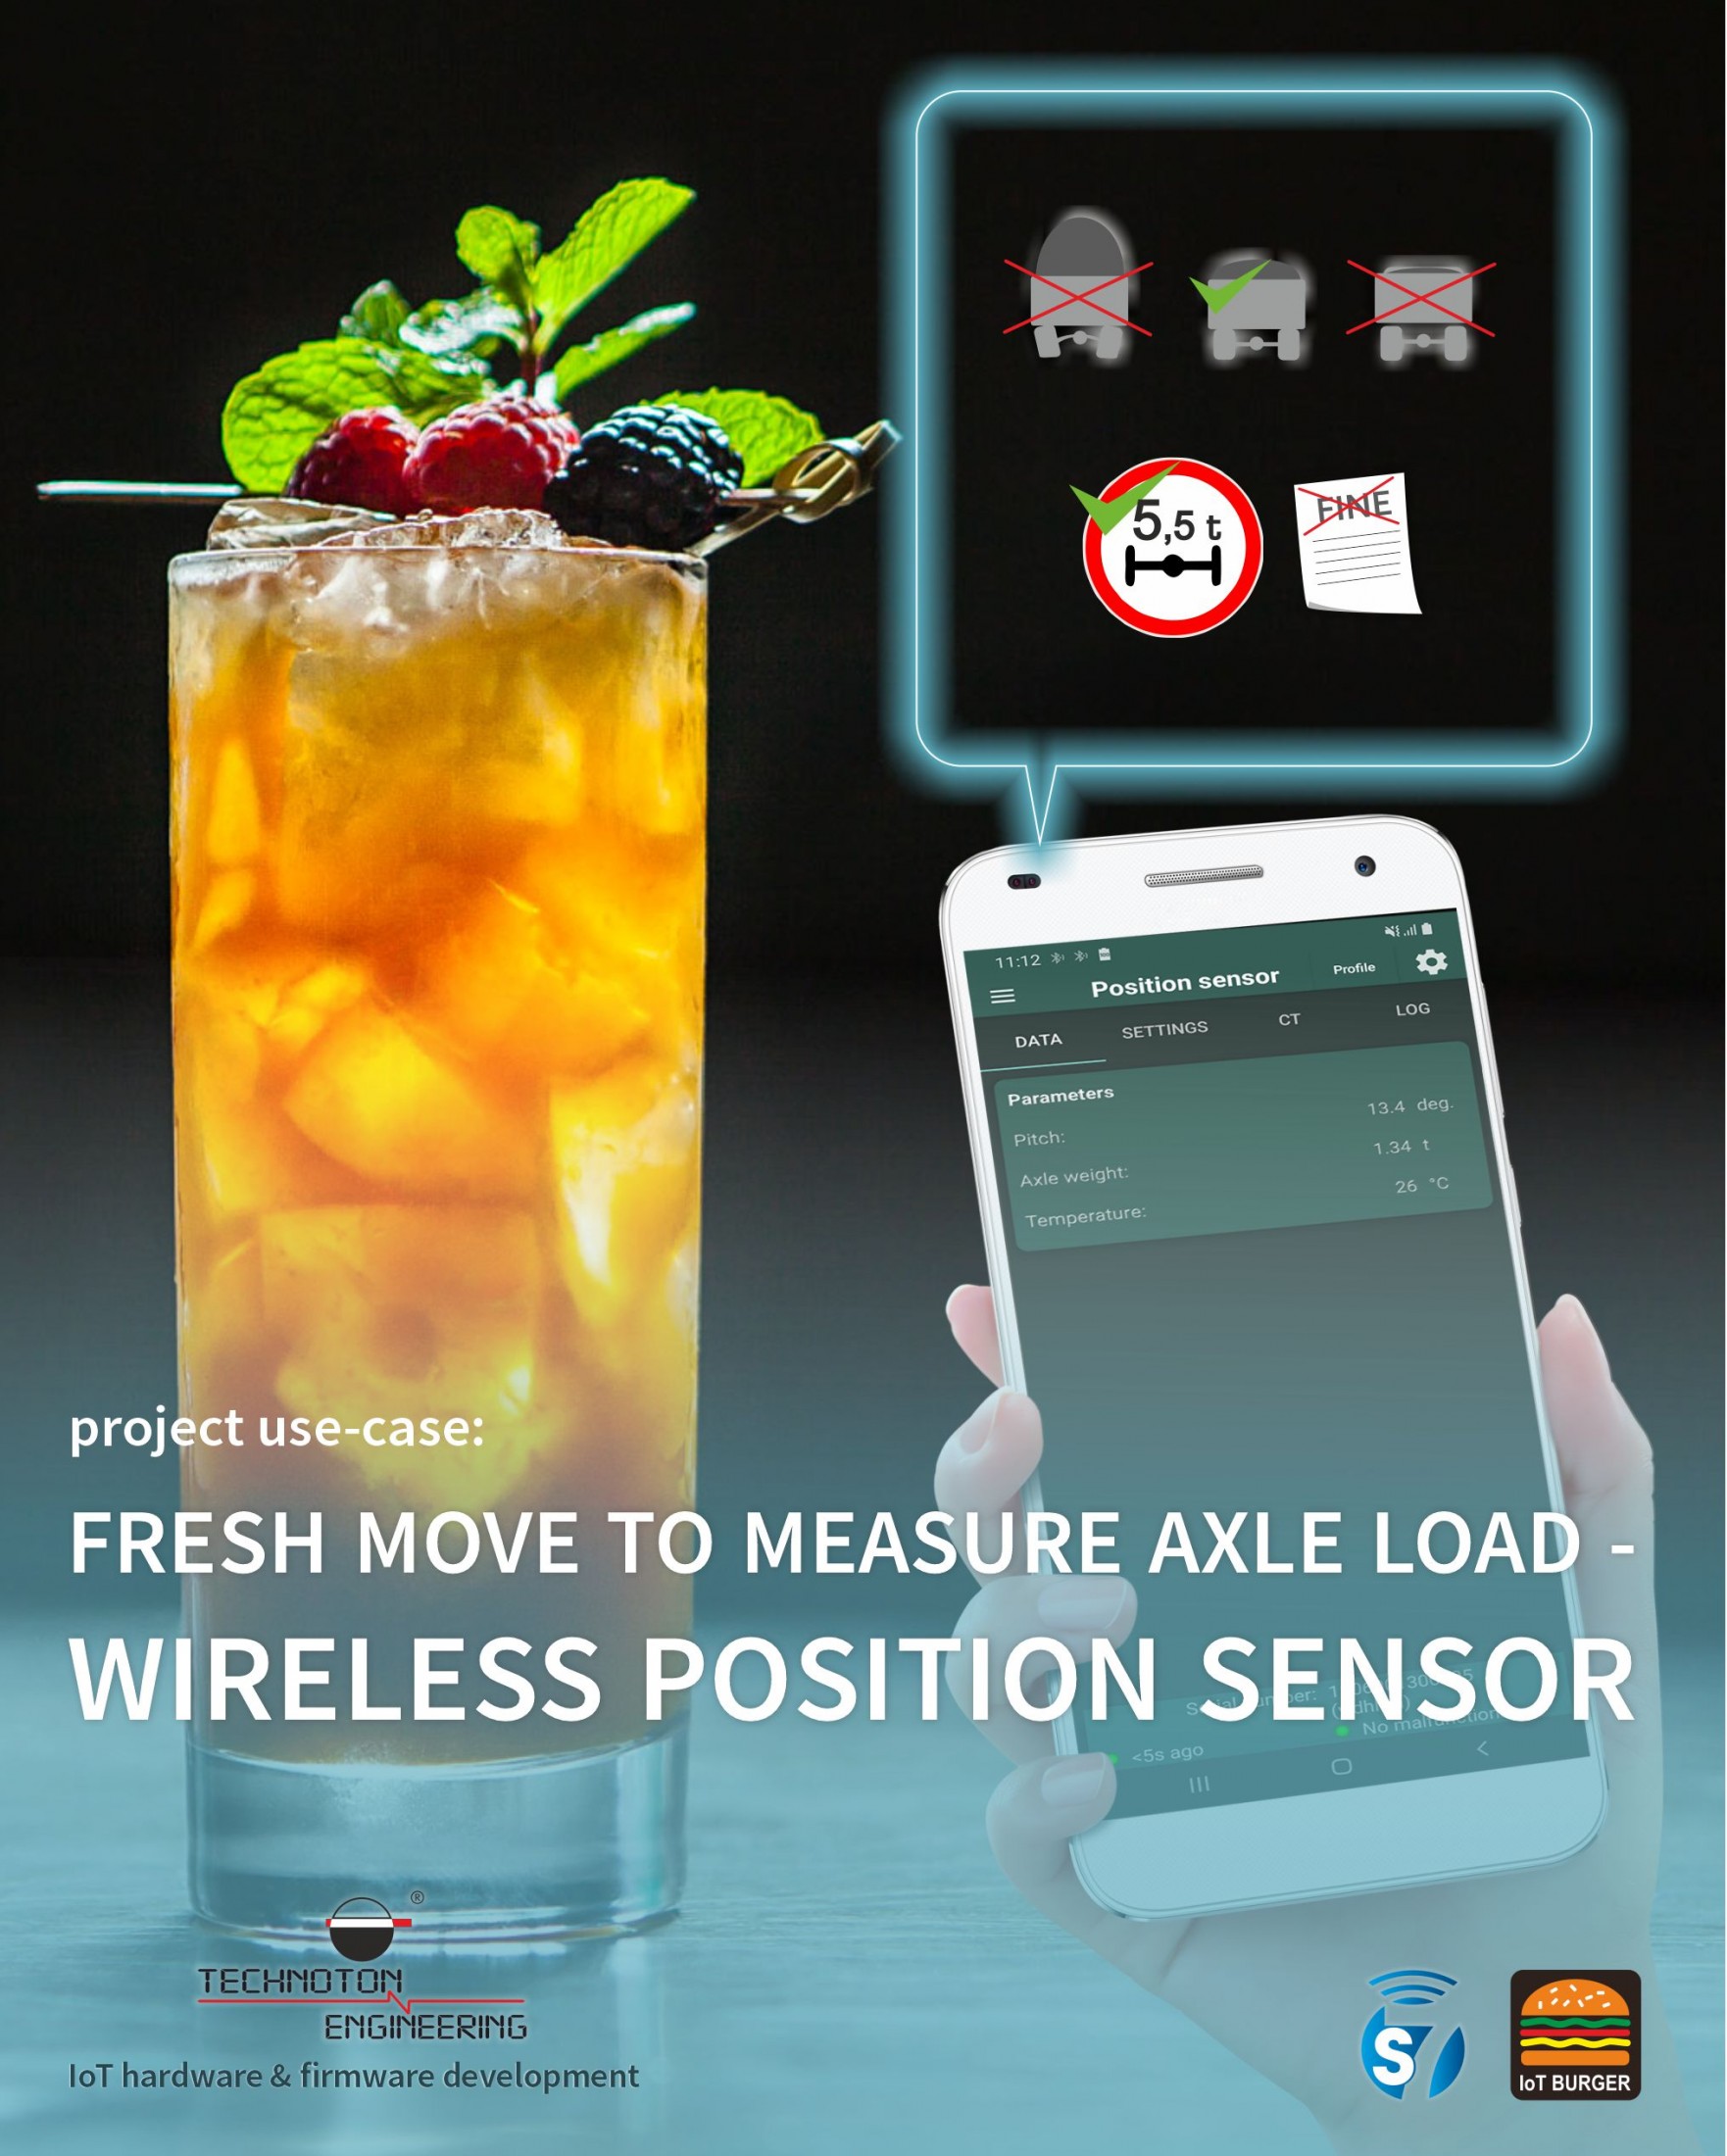 Wireless position sensor for axle load monitoring